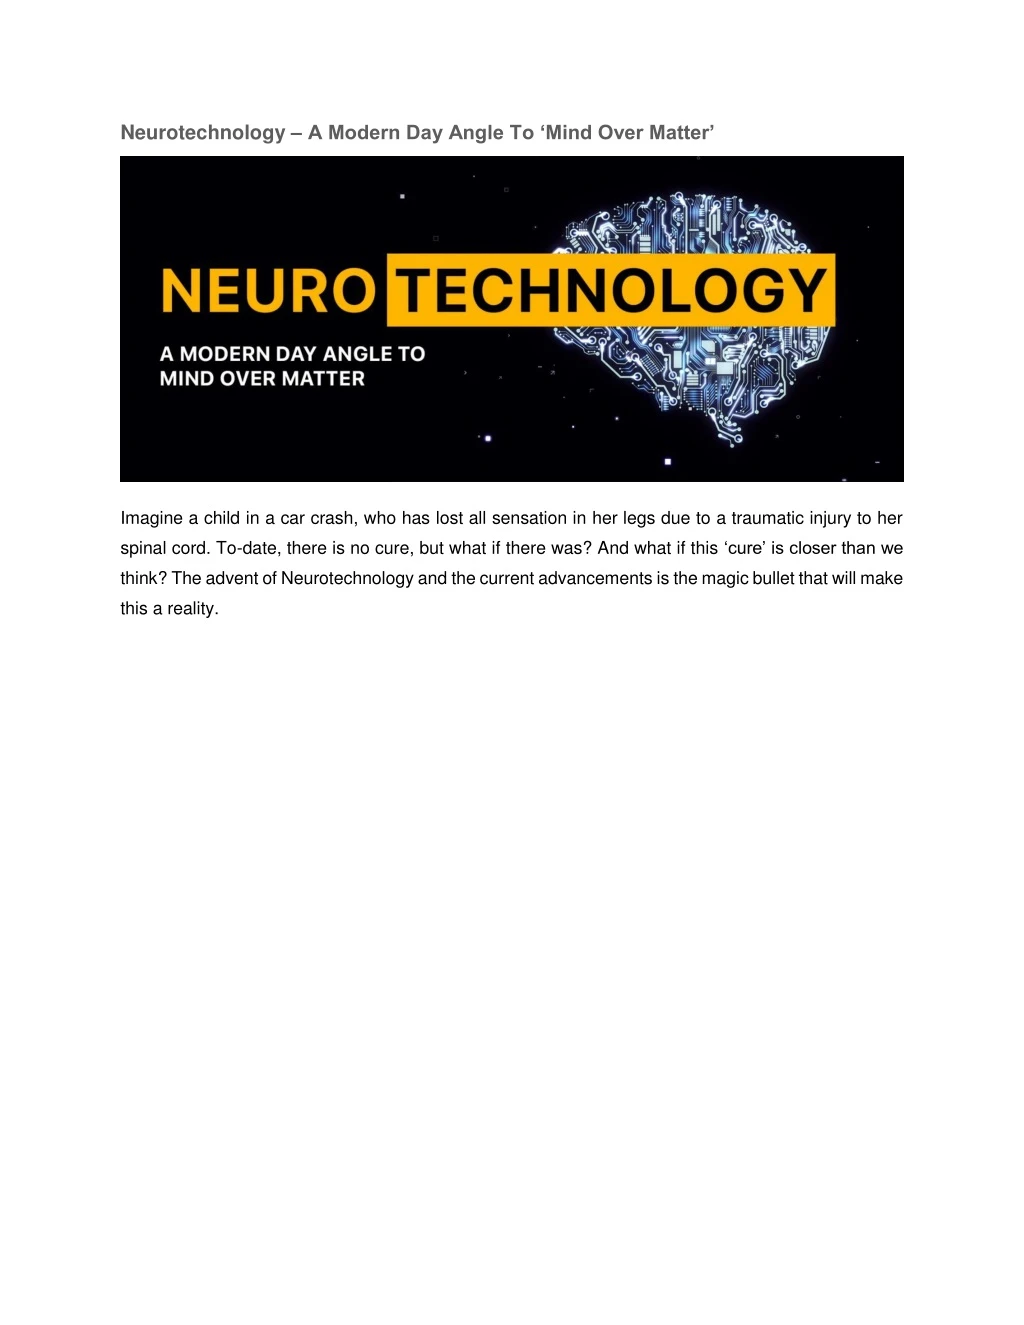 neurotechnology a modern day angle to mind over